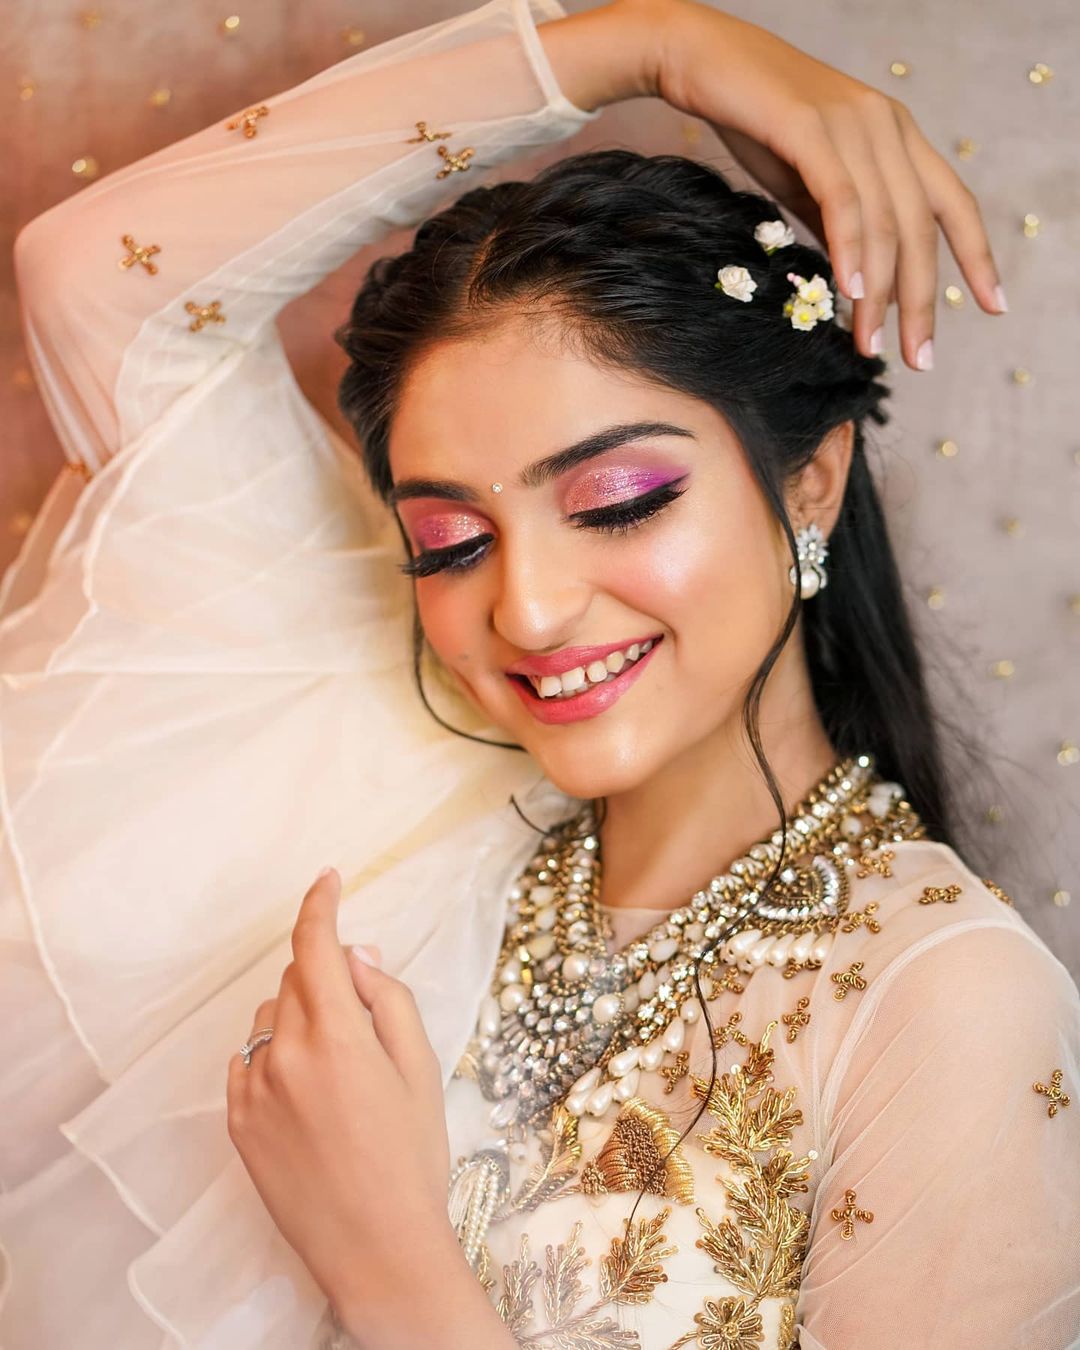 All Hair stylists, Makeup, Nail and Mehendi Artists near Noida, Uttar  Pradesh for bridals and more